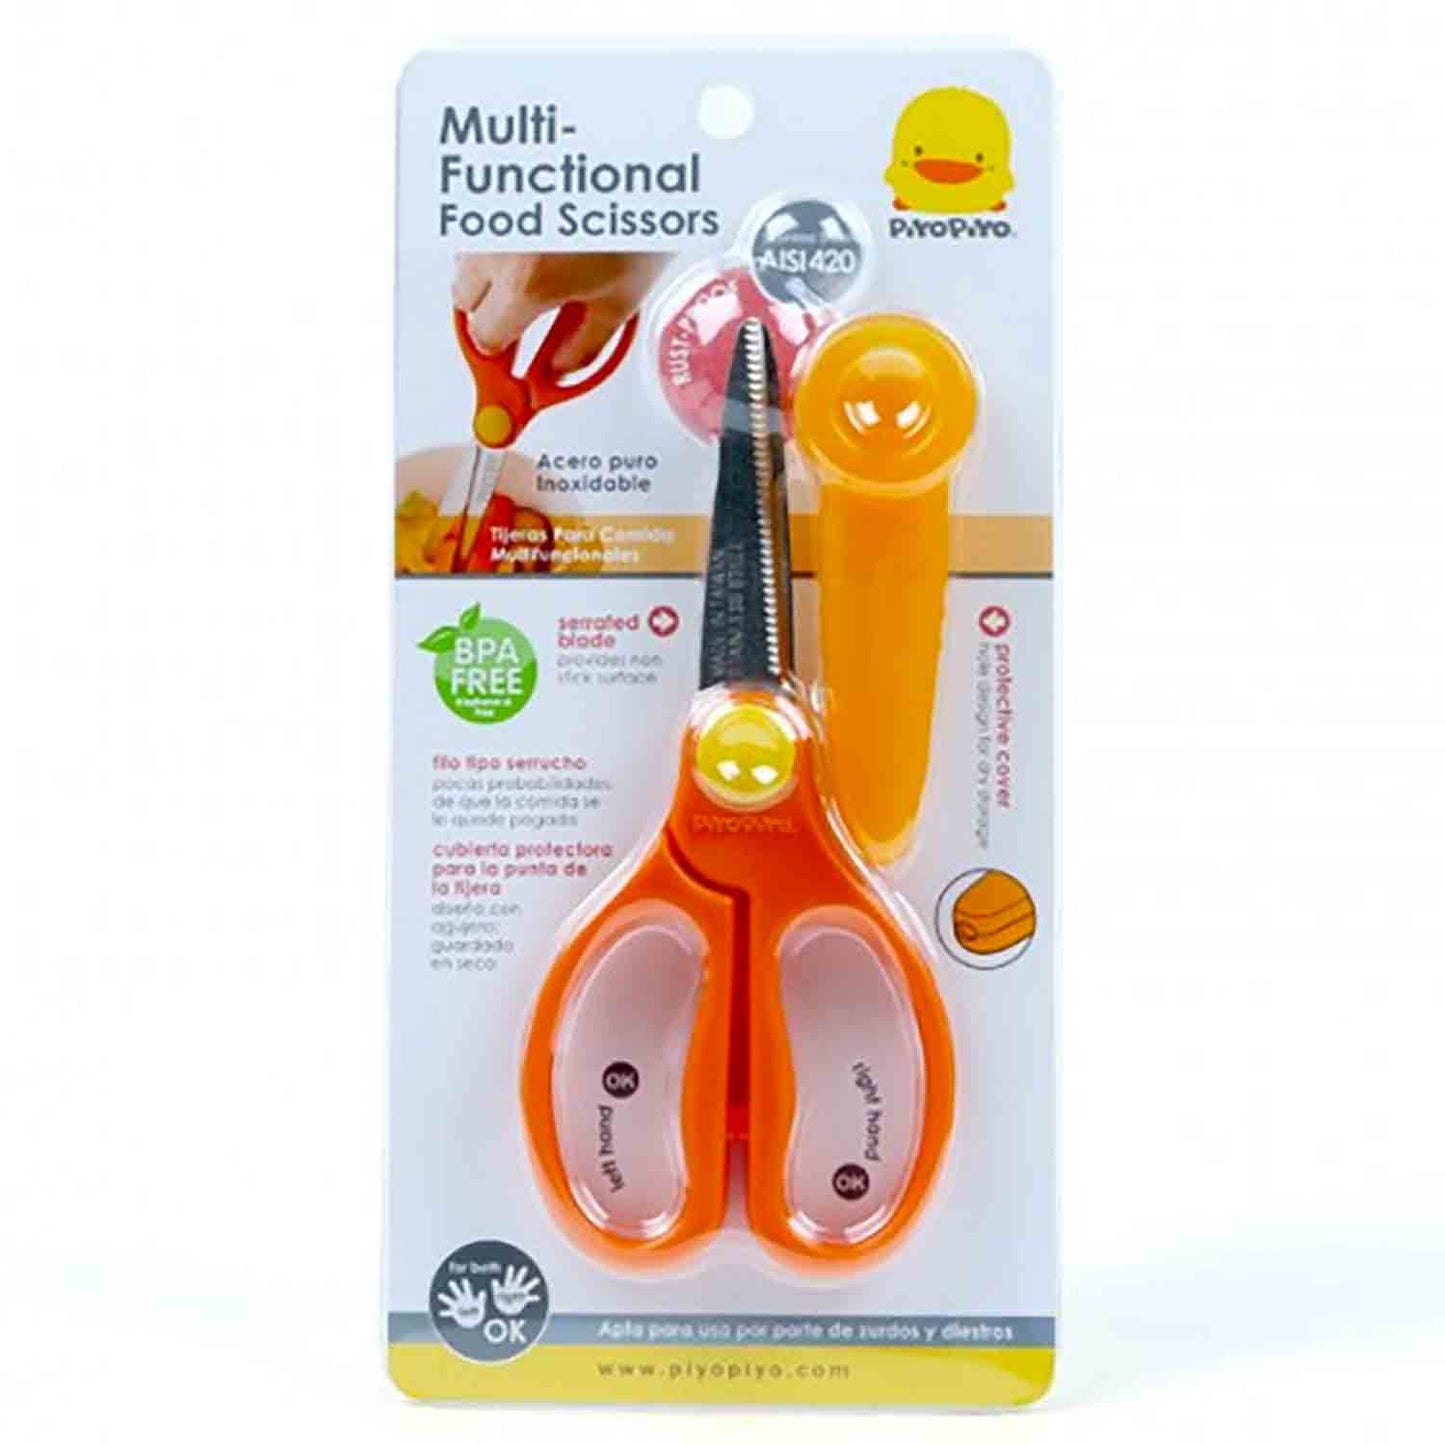 Multi-Functional Food Scissors(Without Packing)